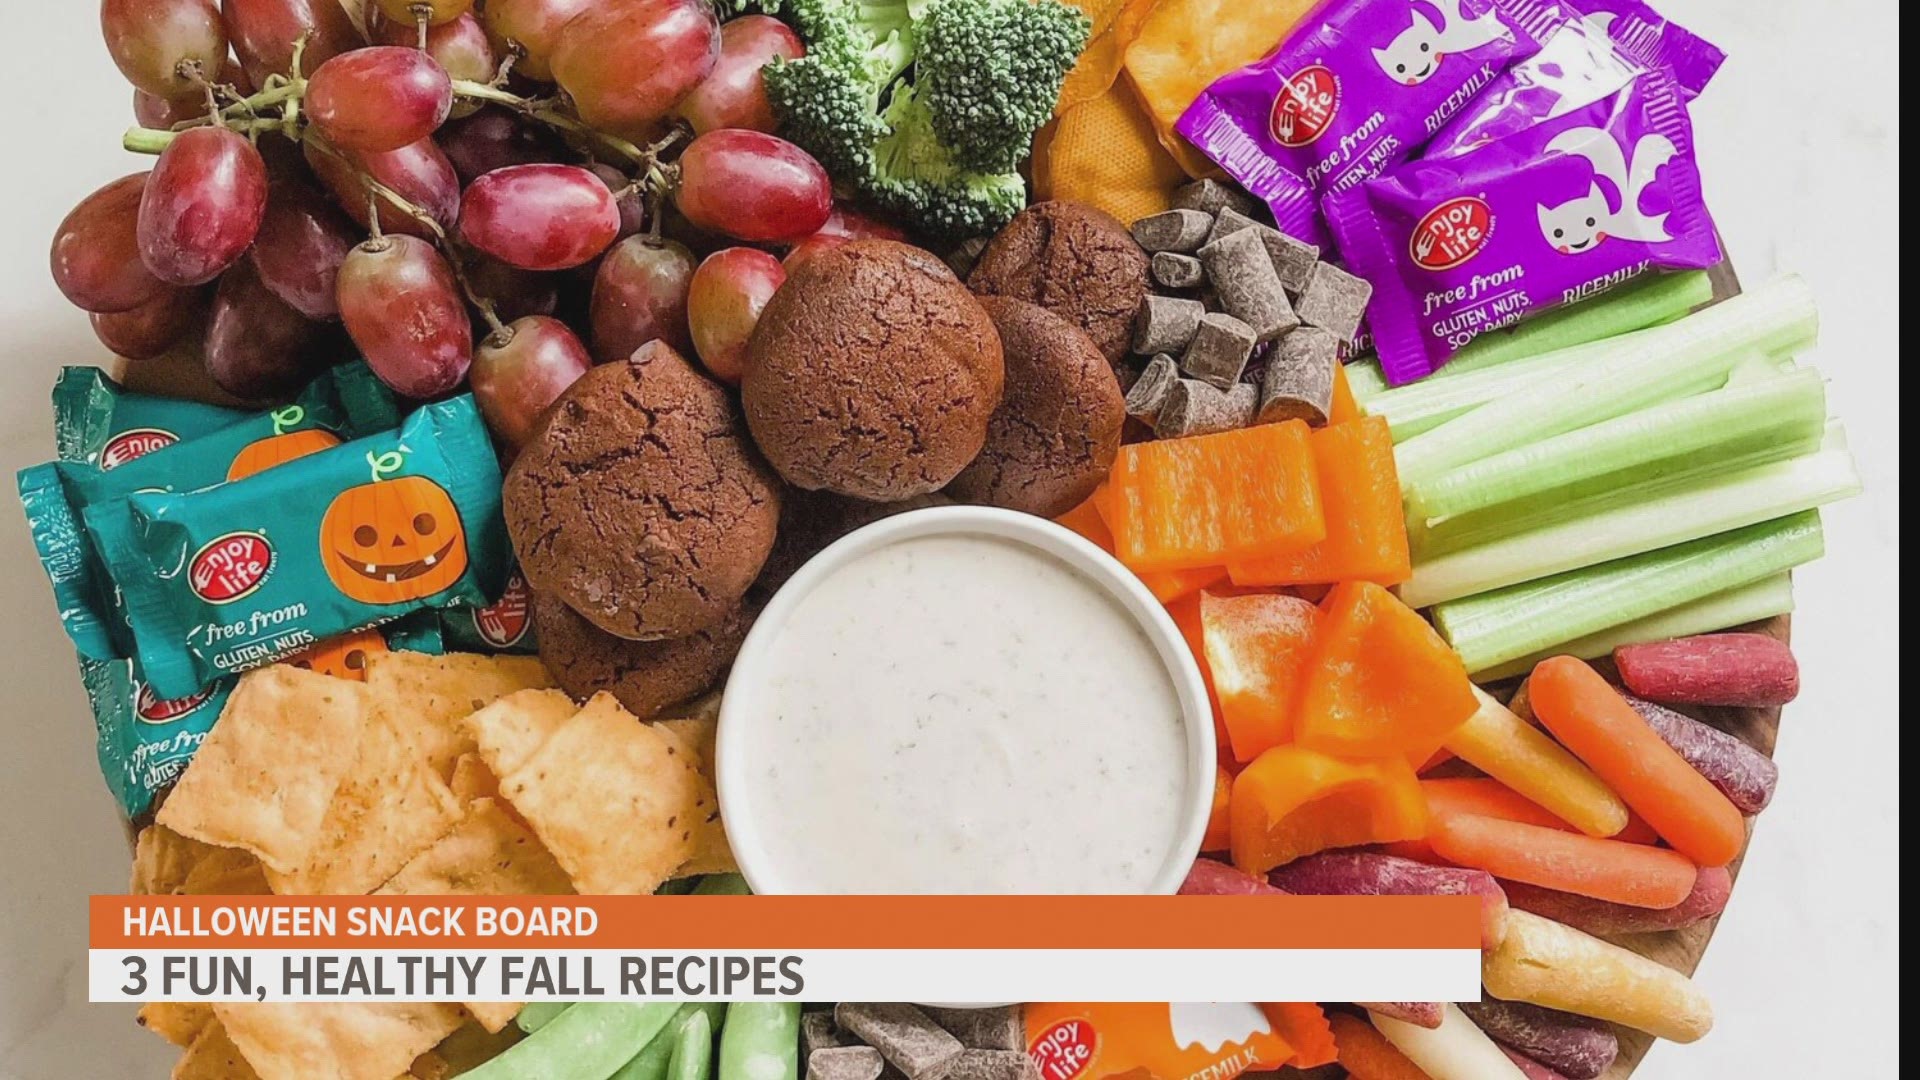 Kara Swanson with Life Well Lived shared three fun and healthy recipes you'll want to try this fall.